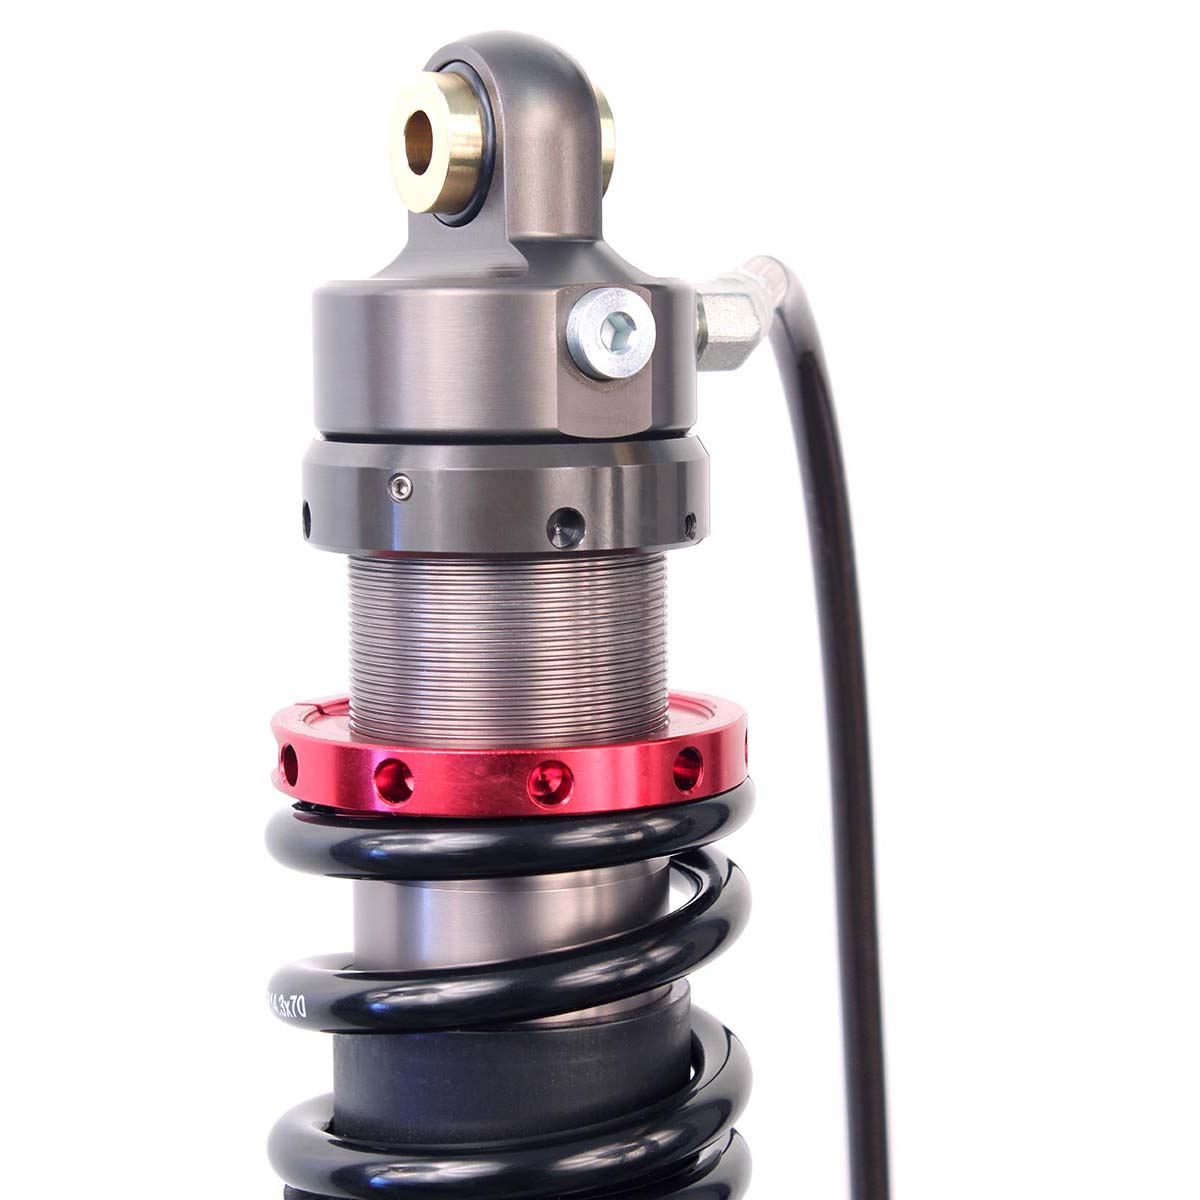 STAGE 4 REAR SHOCK for CAN-AM SPYDER RS, 2008 to 2012